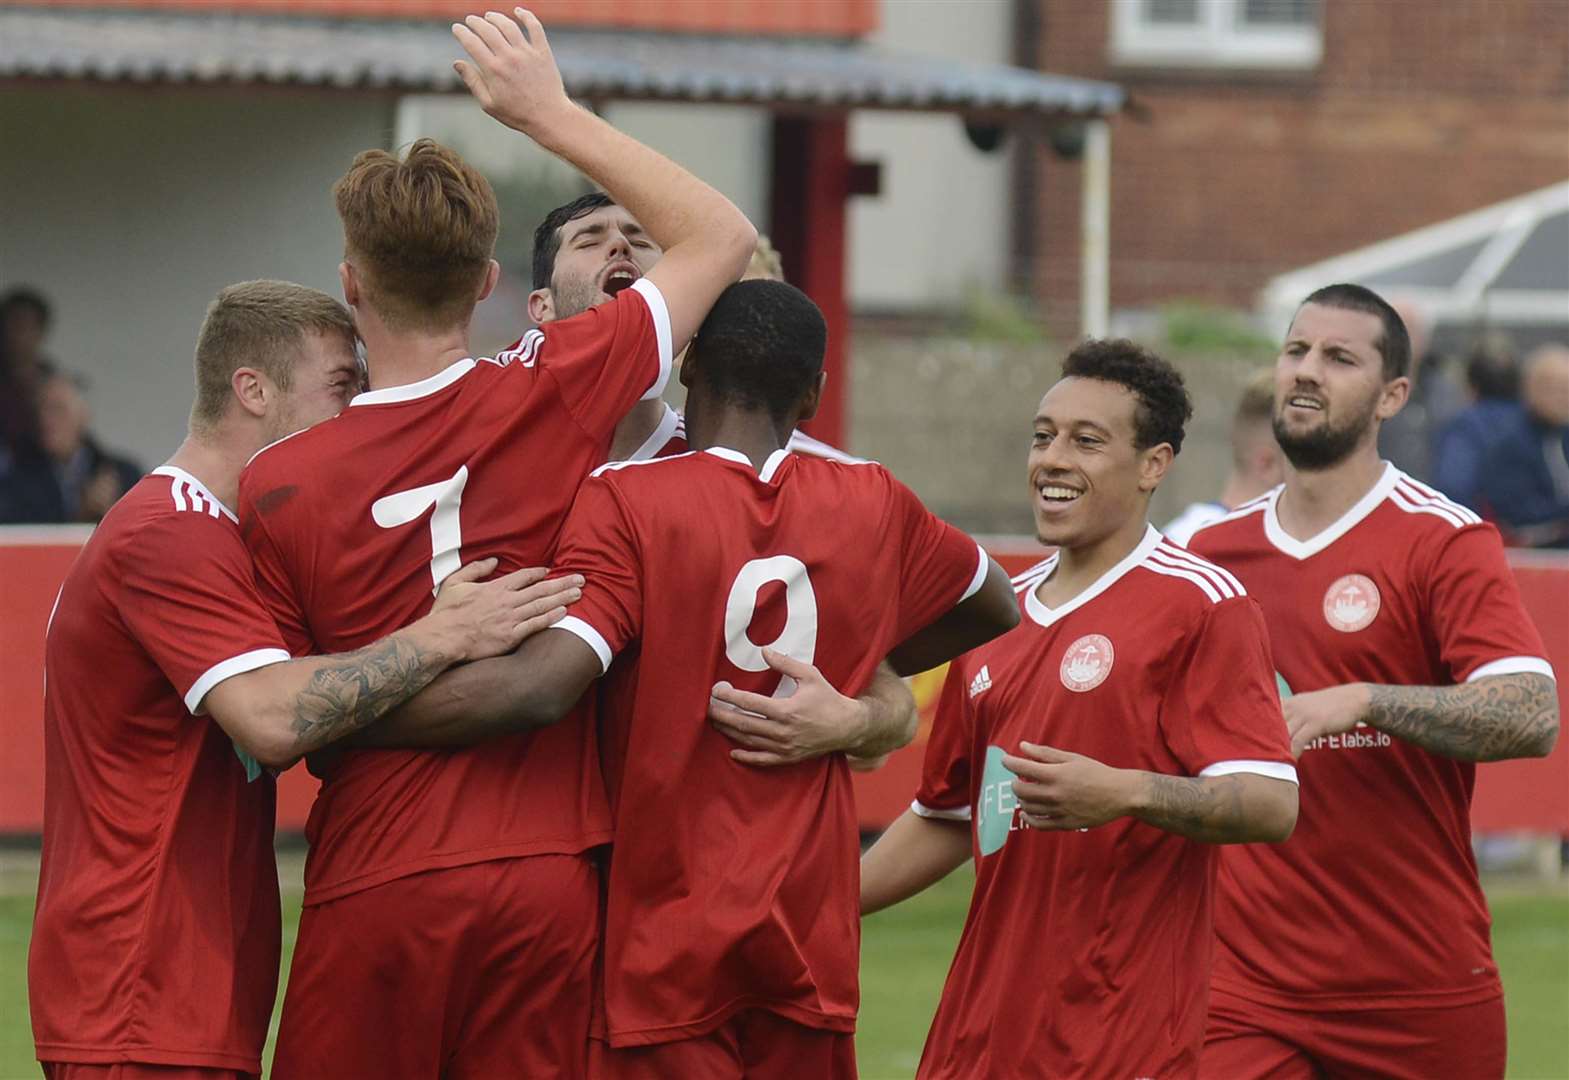 Hythe celebrate Tom Carlton's goal in the 2-0 win over Haywards Heath at Reachfields on Saturday Picture: Paul Amos